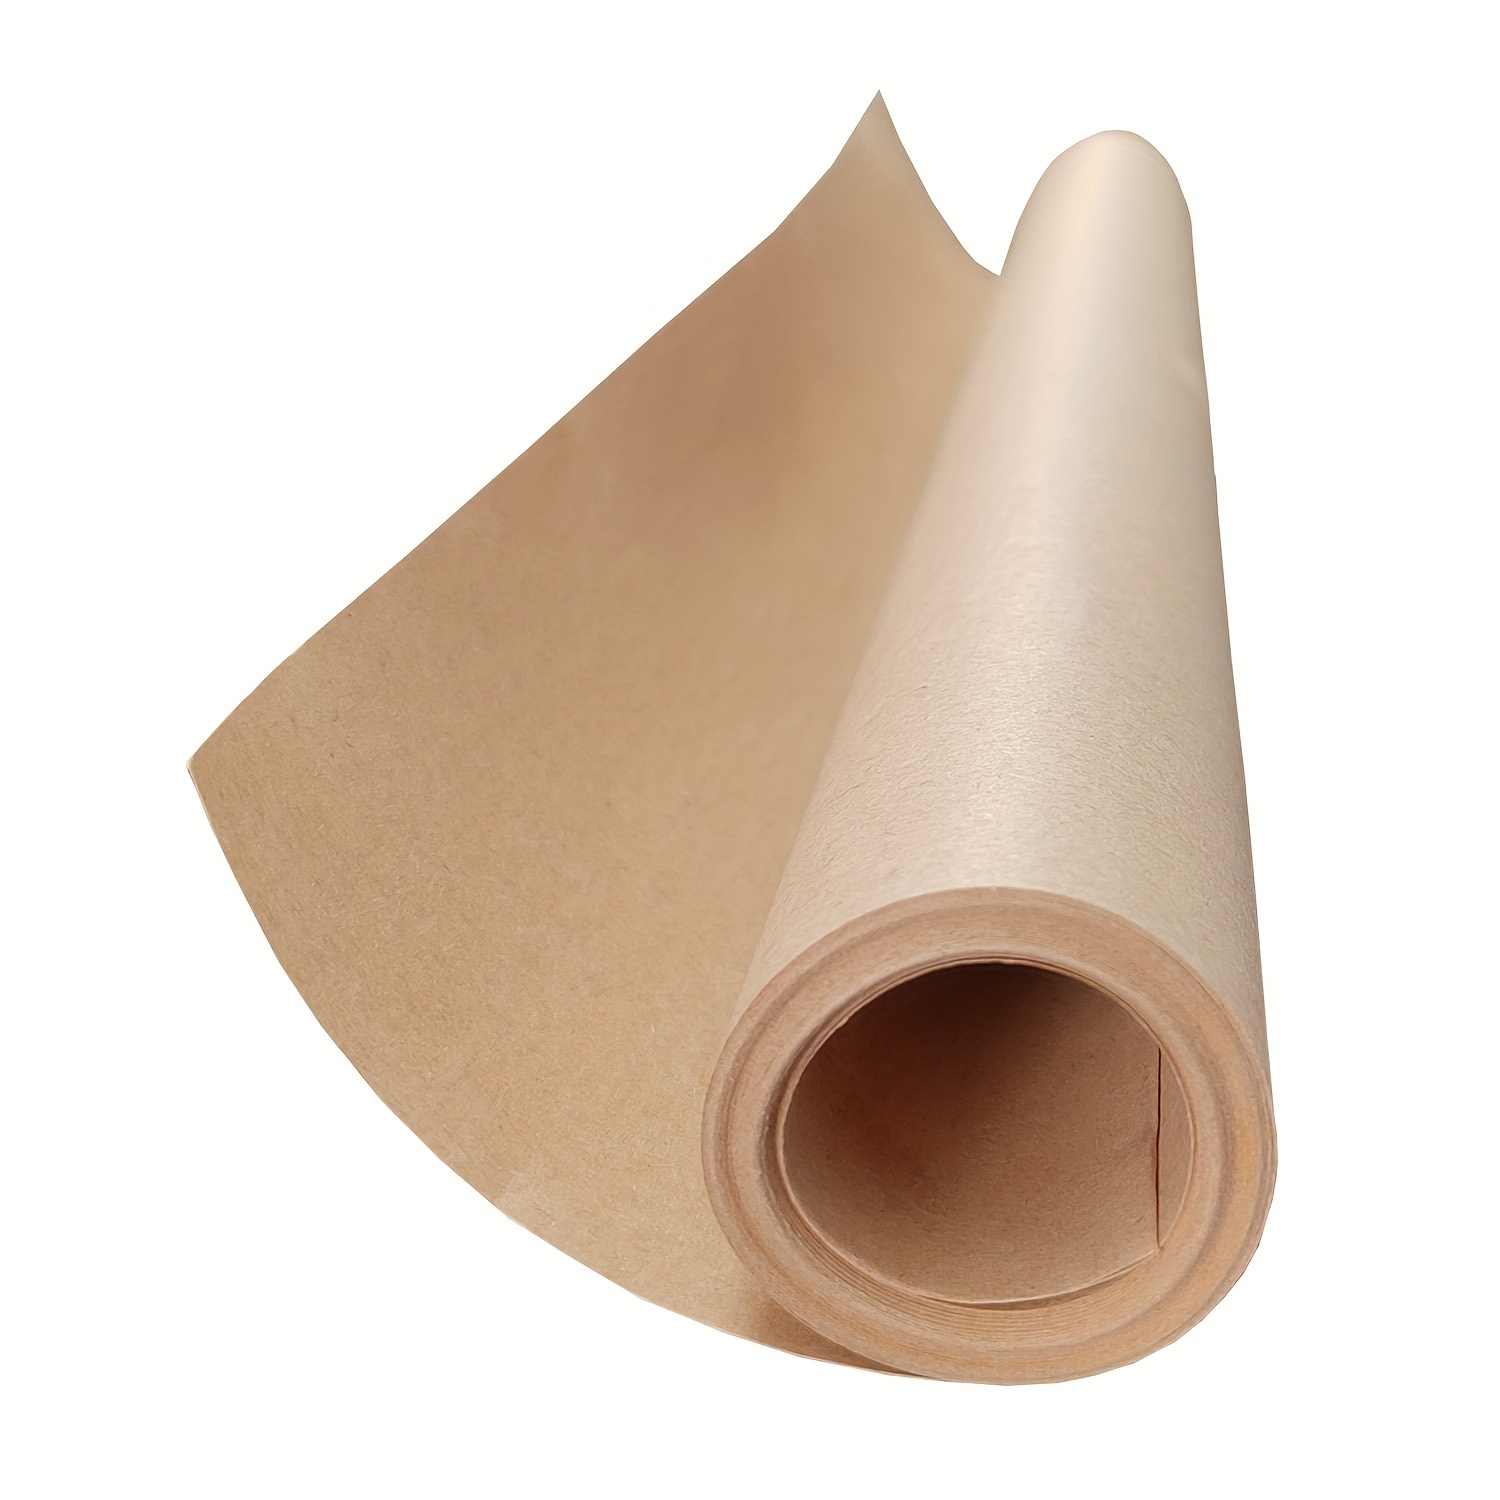 Phinus Brown Paper Roll 15'400' Brown Wrapping Paper Wrapping Paper Craft Paper Packing Paper for Moving Packing Gift Wrapping Wall Art Table Runner F